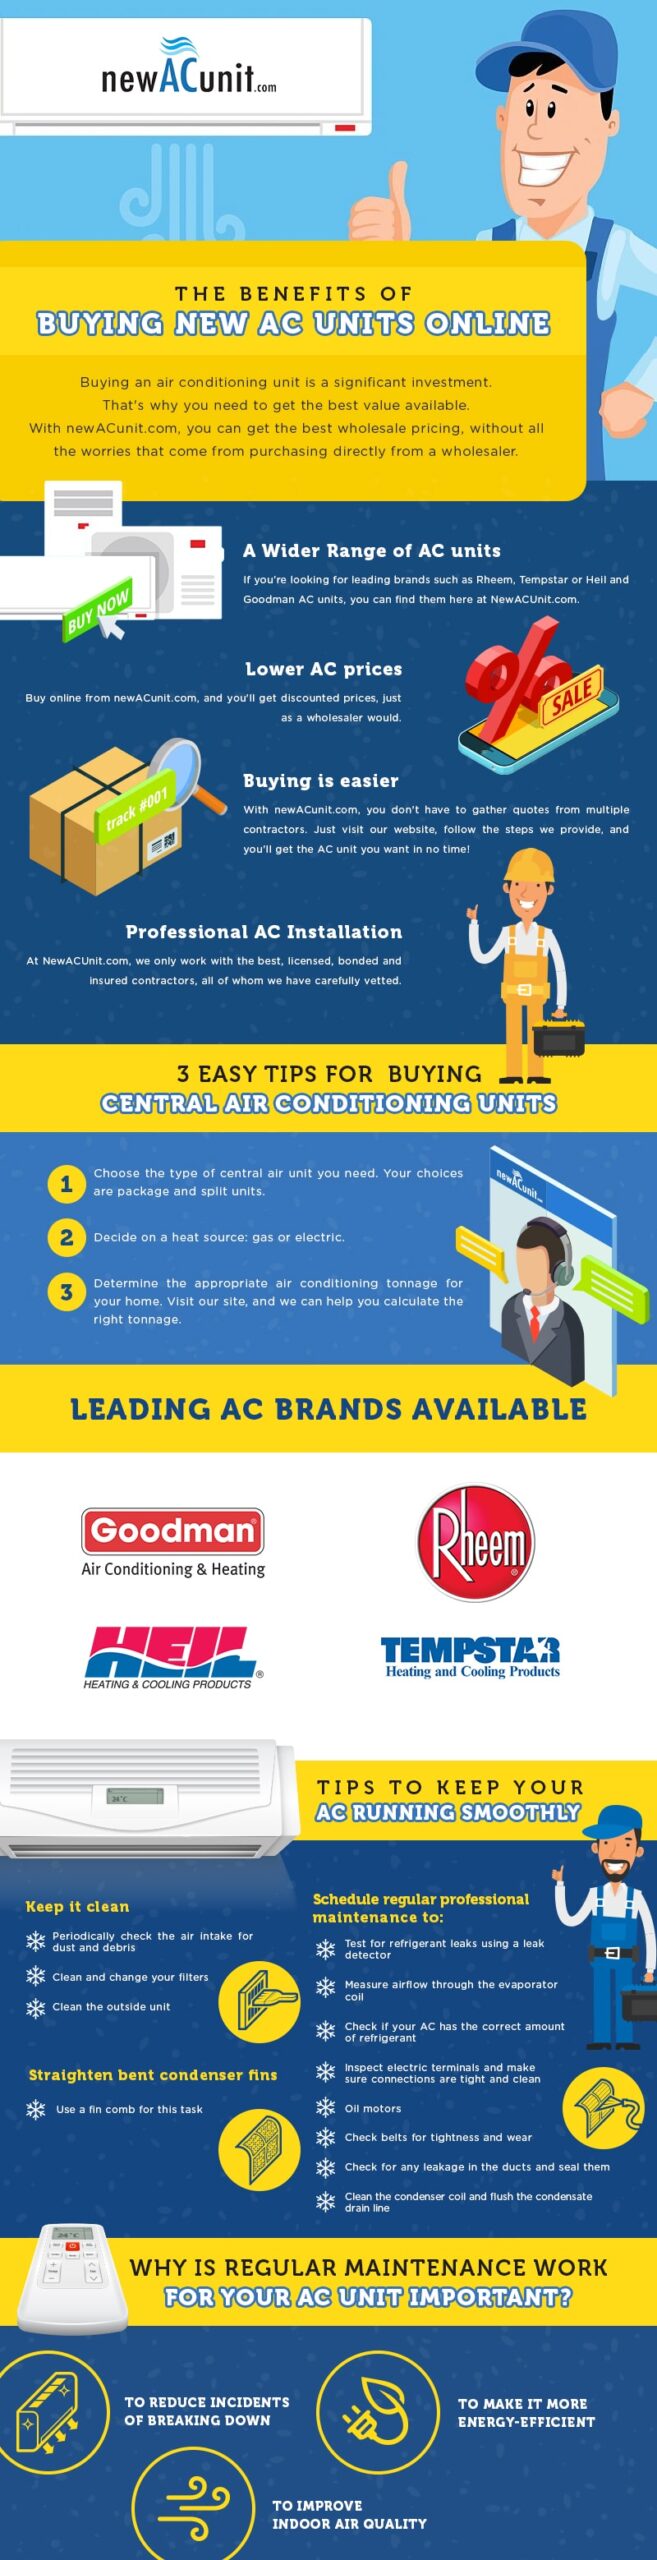 The Benefits of Buying New AC Units Online Infographic (1)